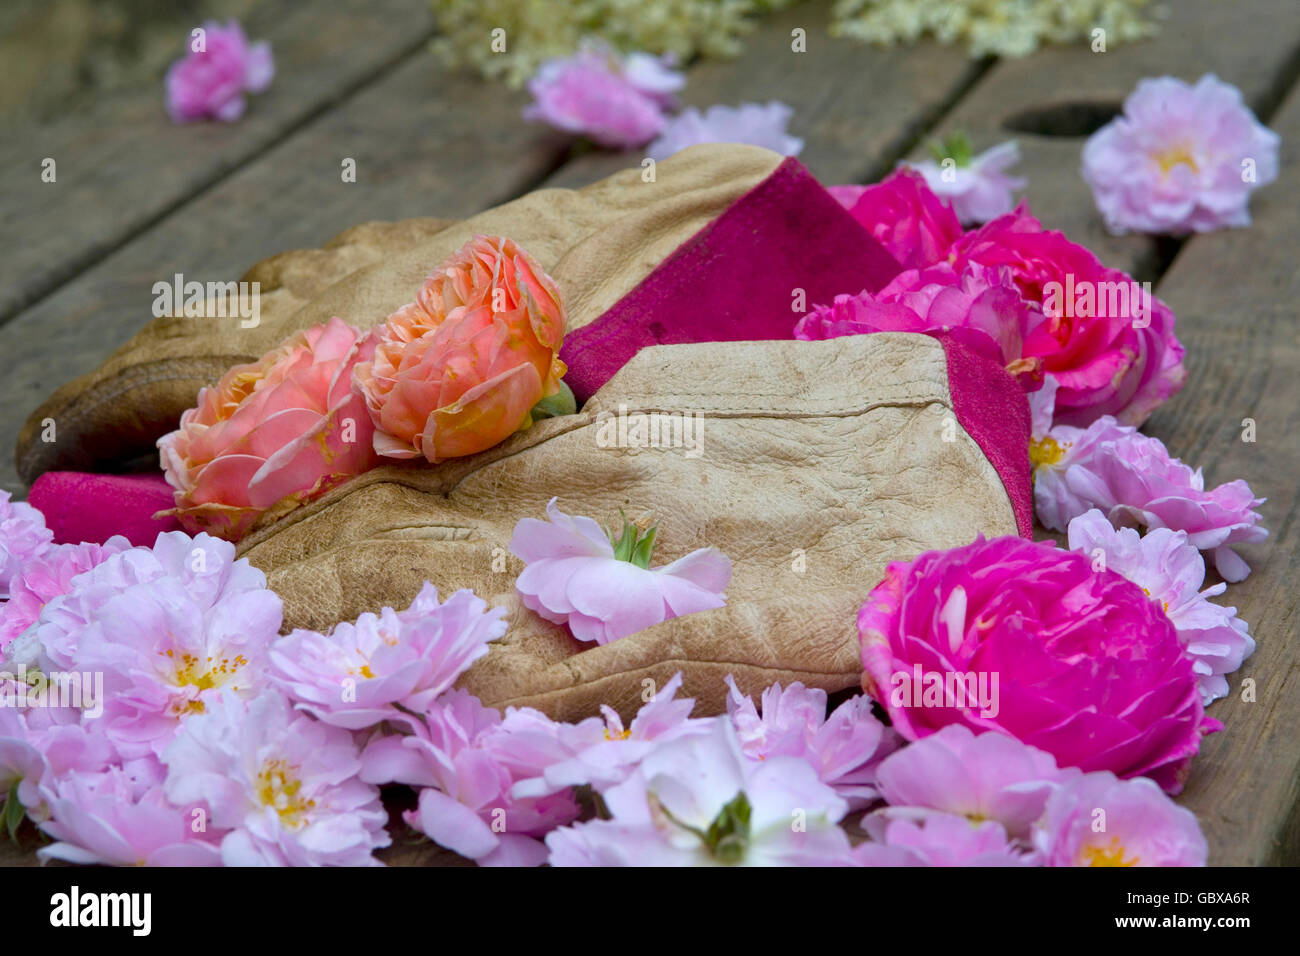 gloves left on table after gardening Stock Photo